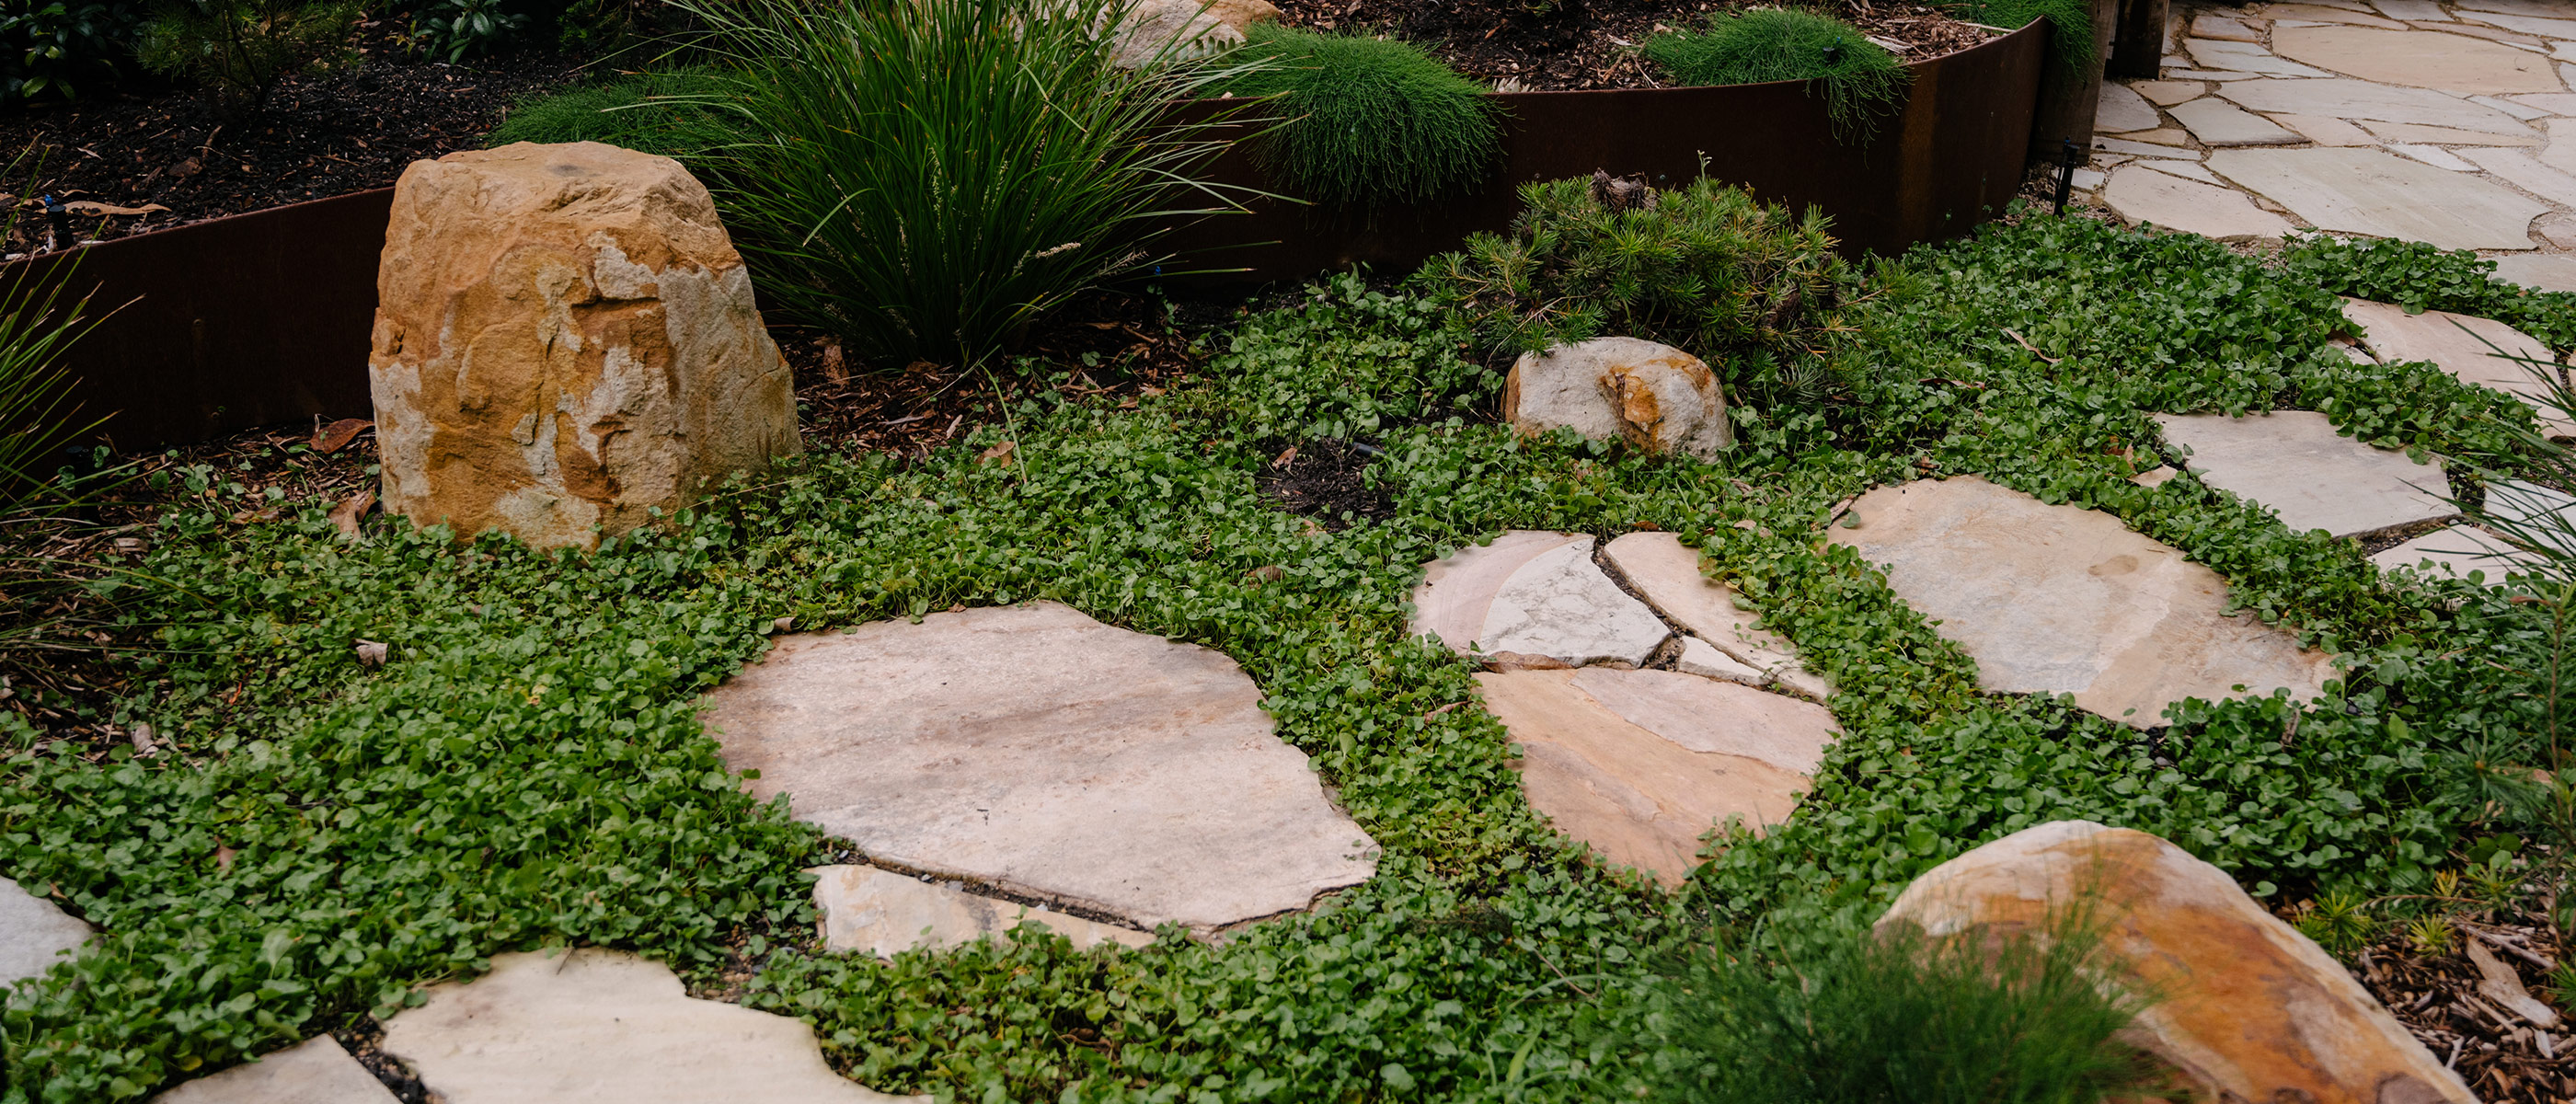 Meandering sandstone crazy pave stepper path through garden bed of dichondra and feature boulders